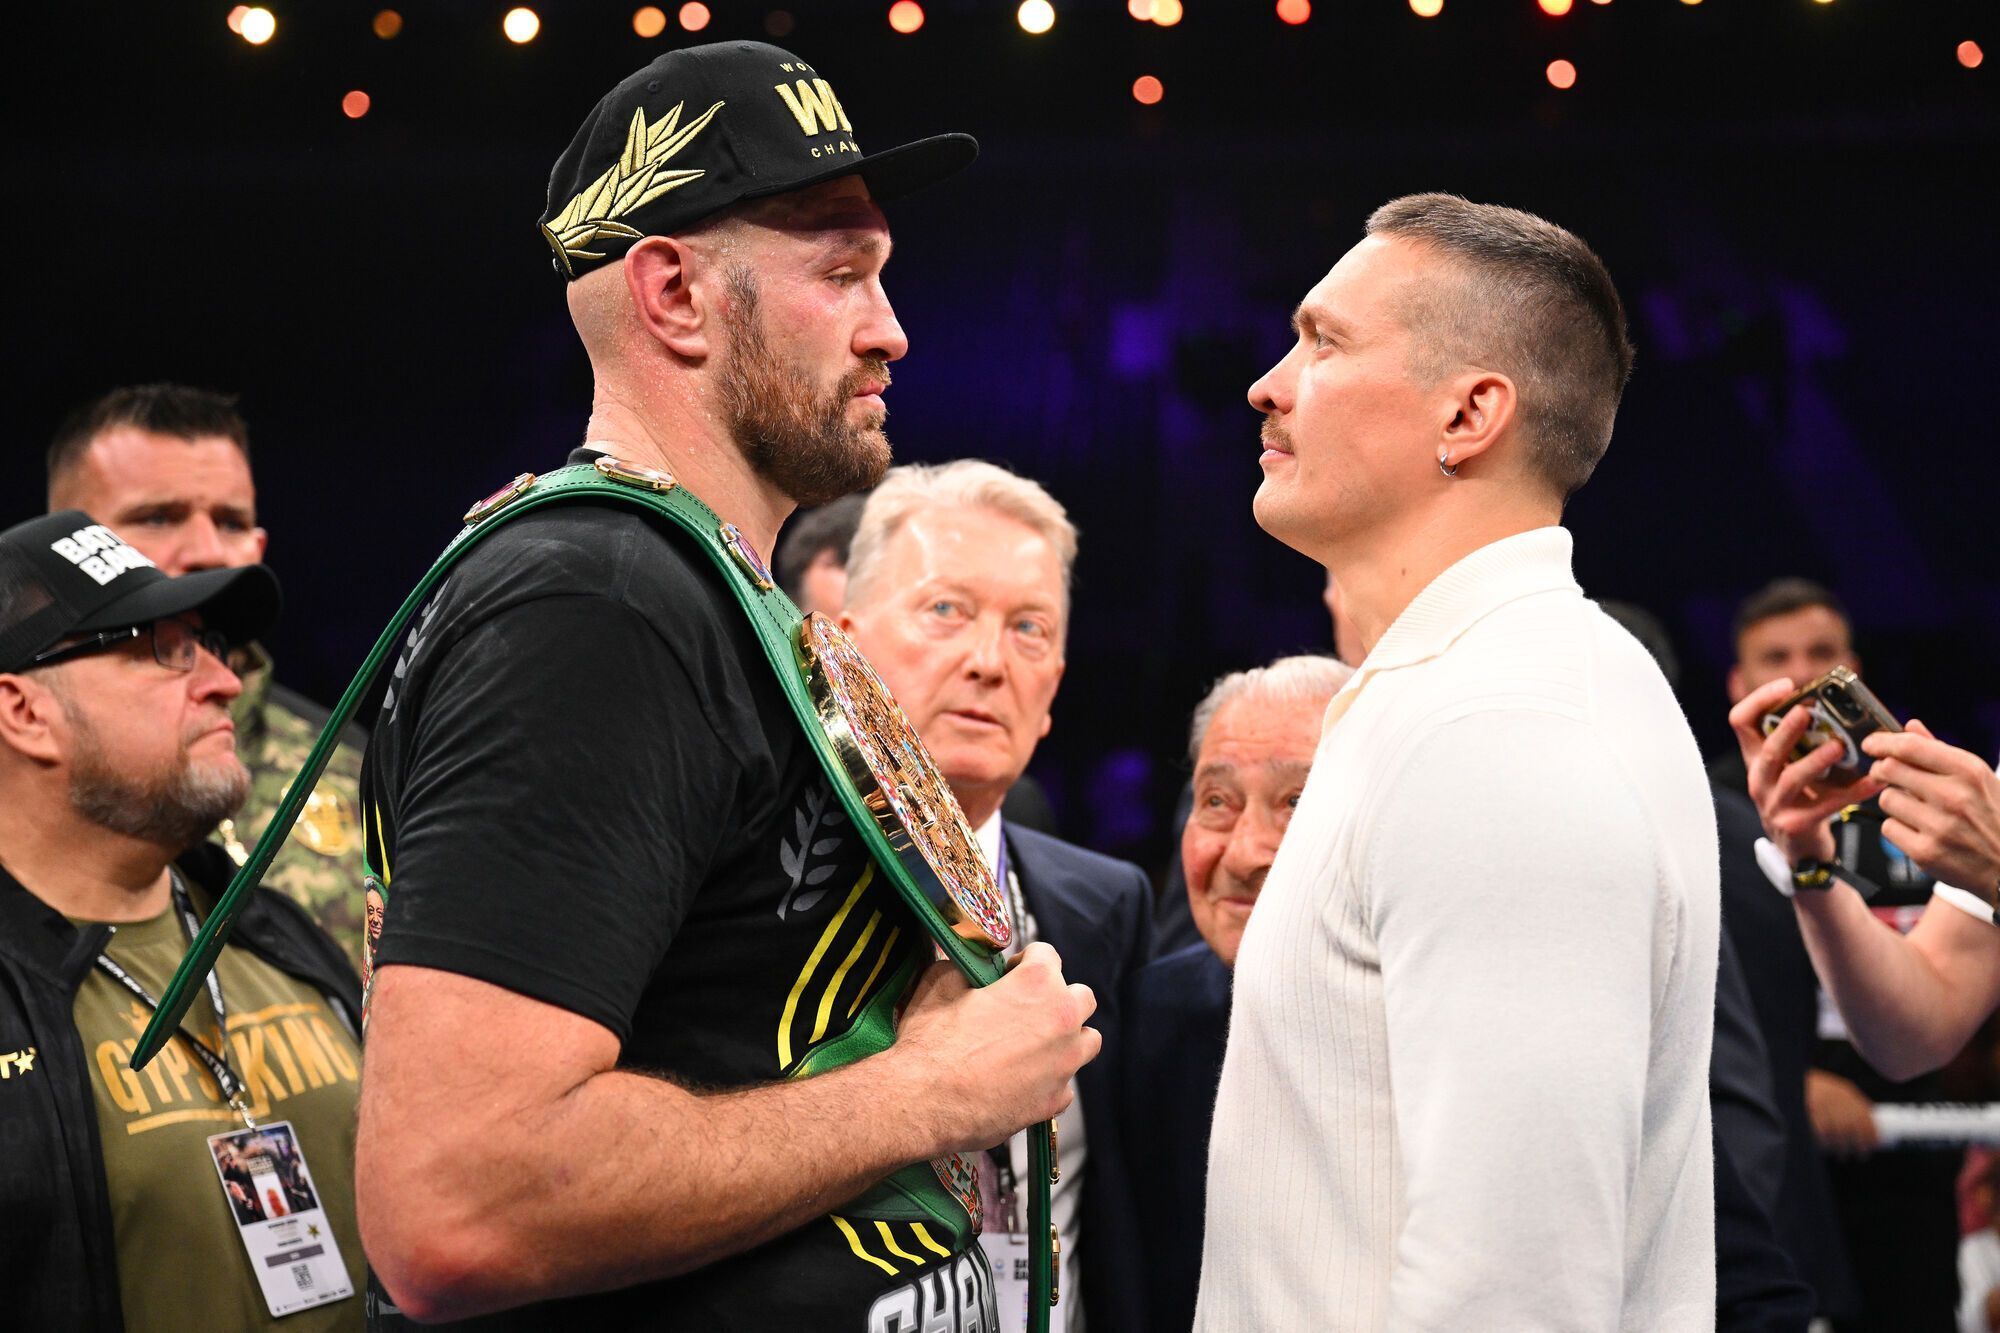 The main intrigue of the Usyk-Fury fight is revealed